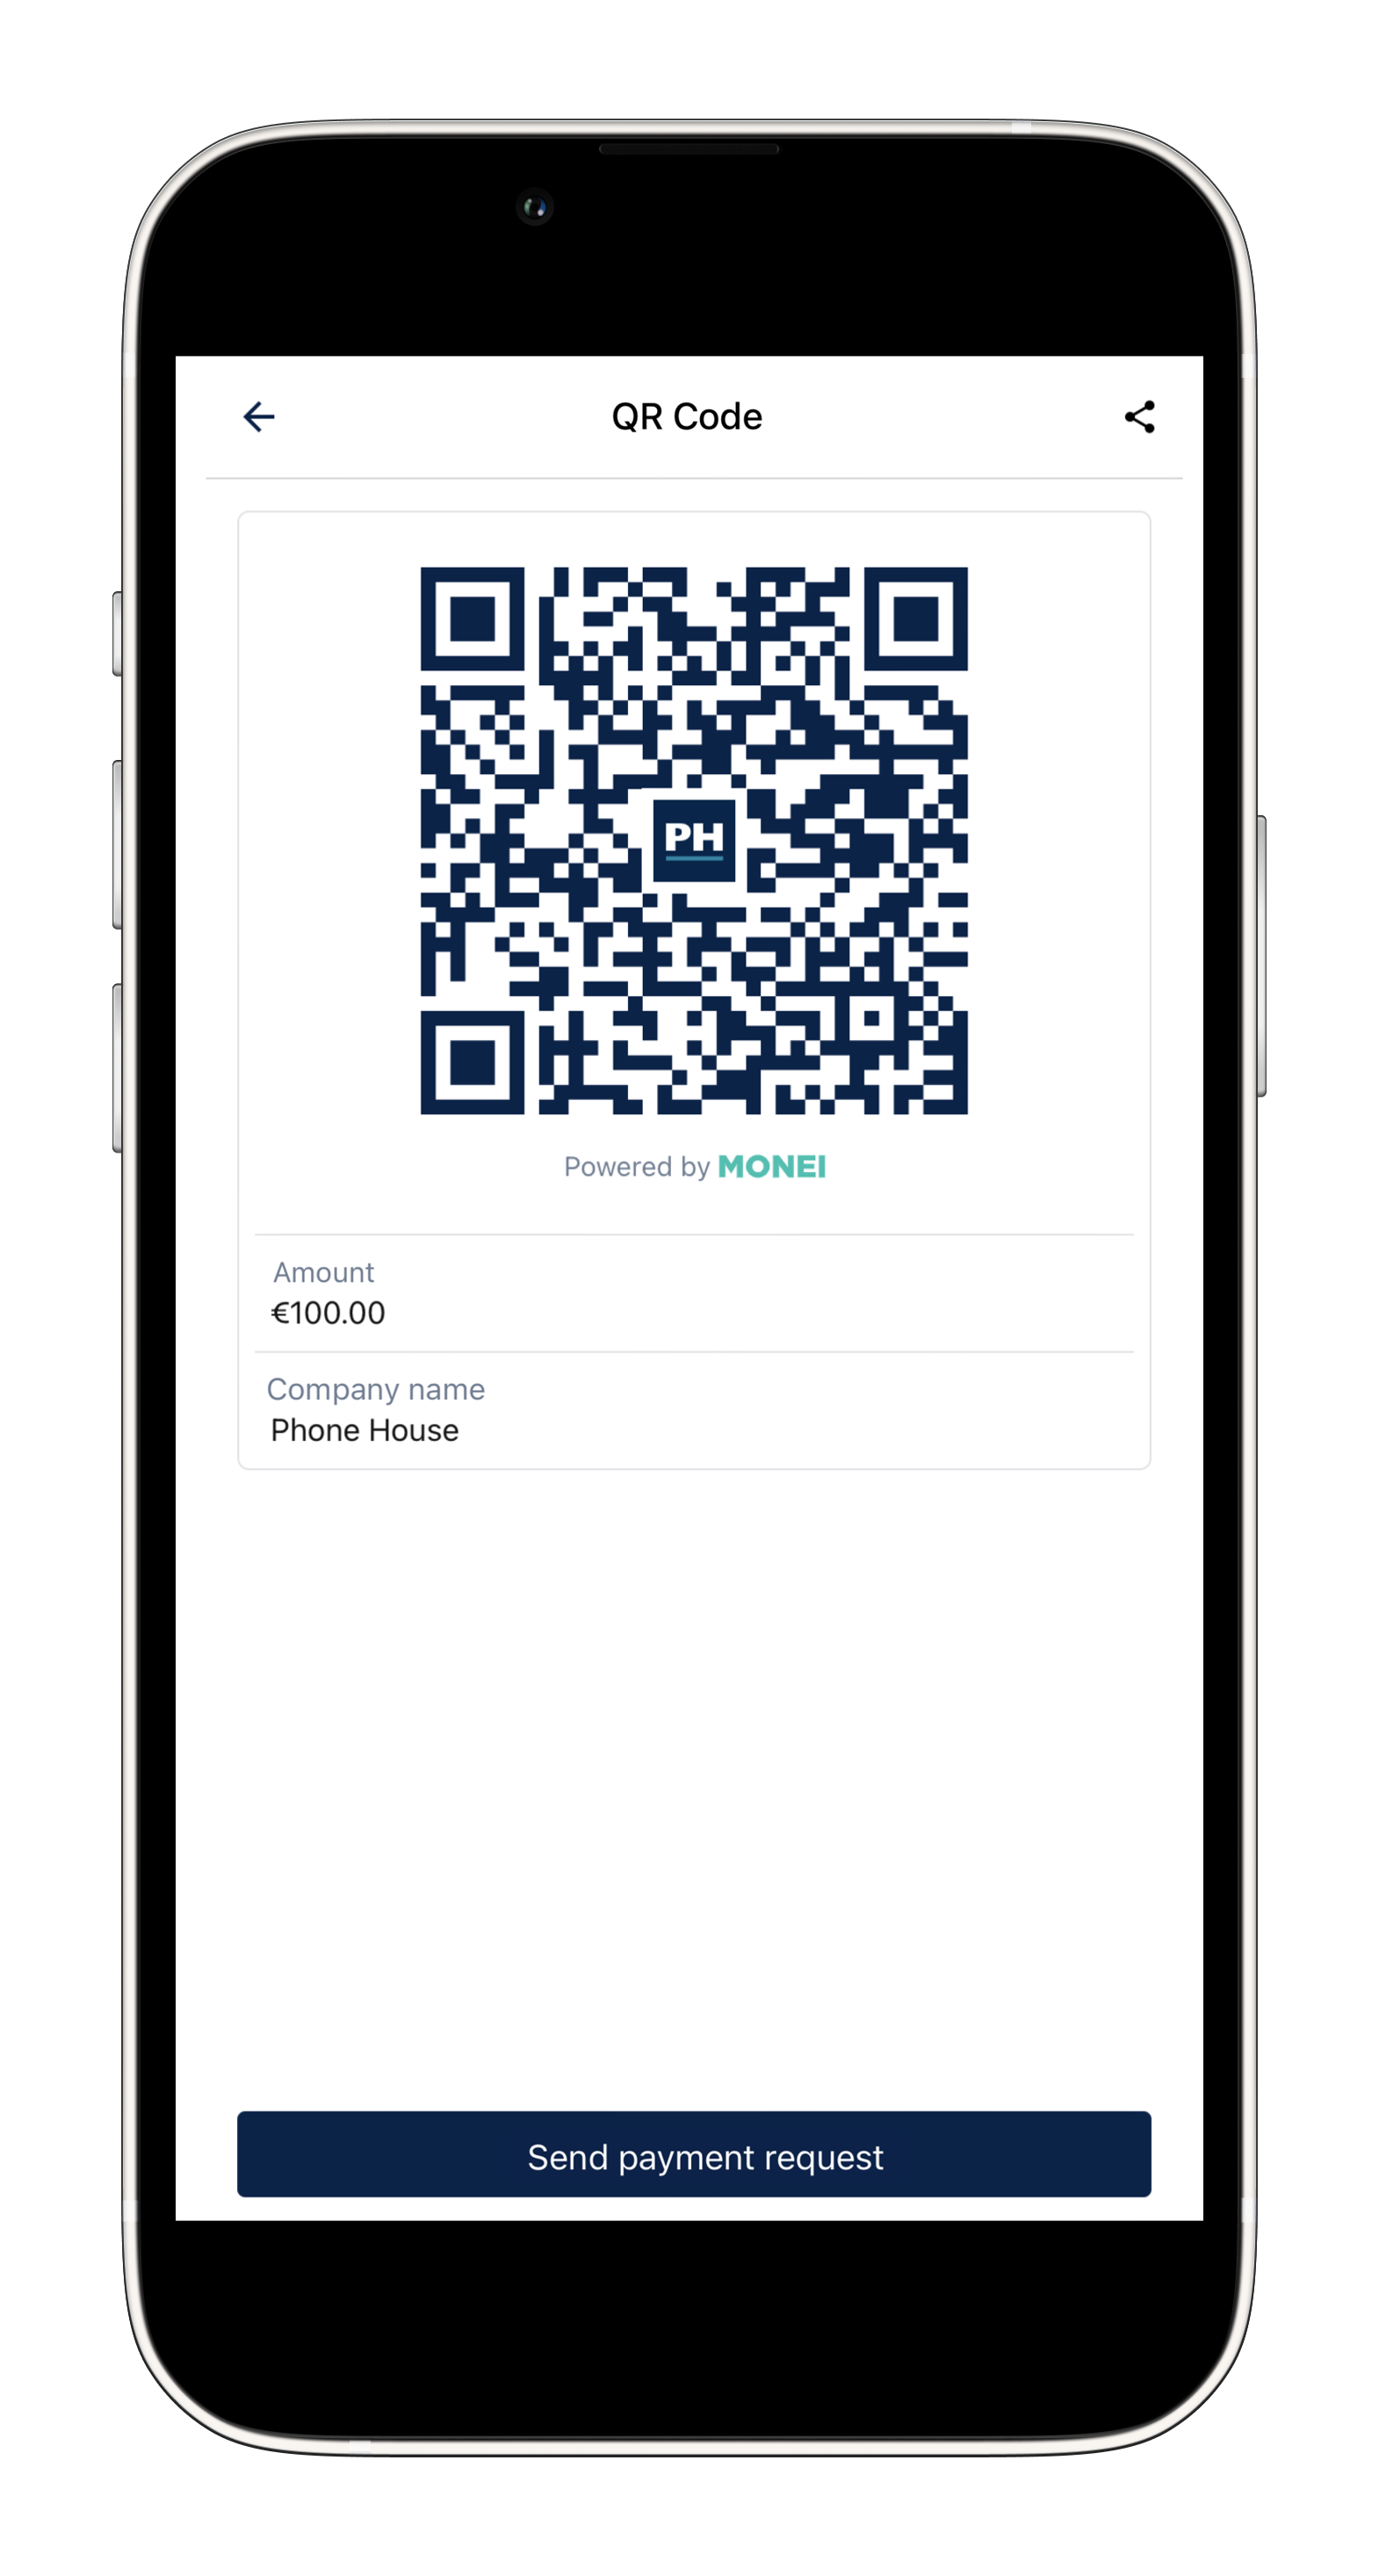 Scan to Pay